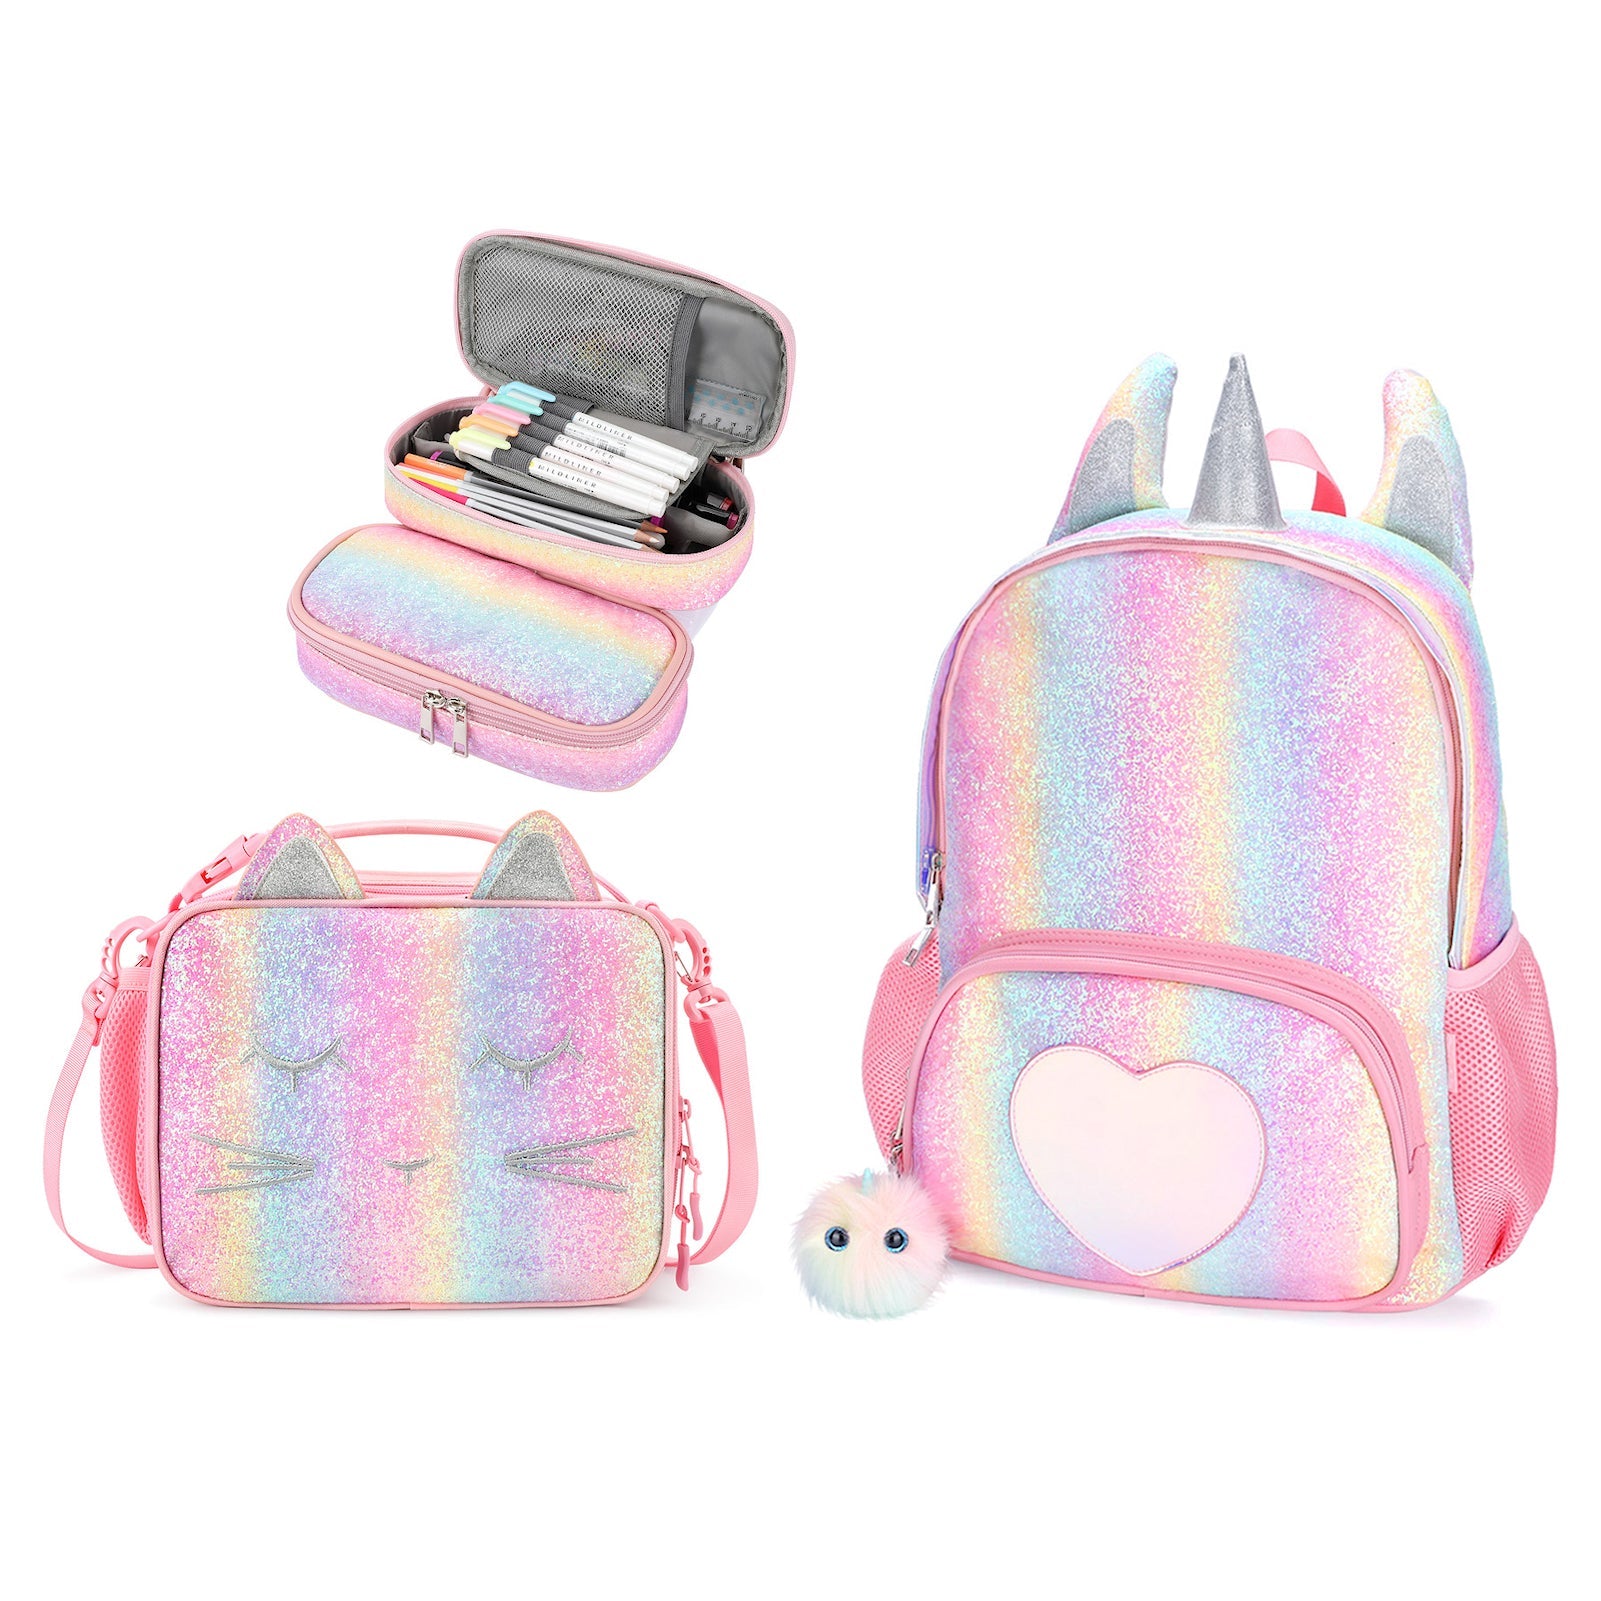 Unicorns Personalized Large Kids School Backpack with Side Pockets +  Reviews